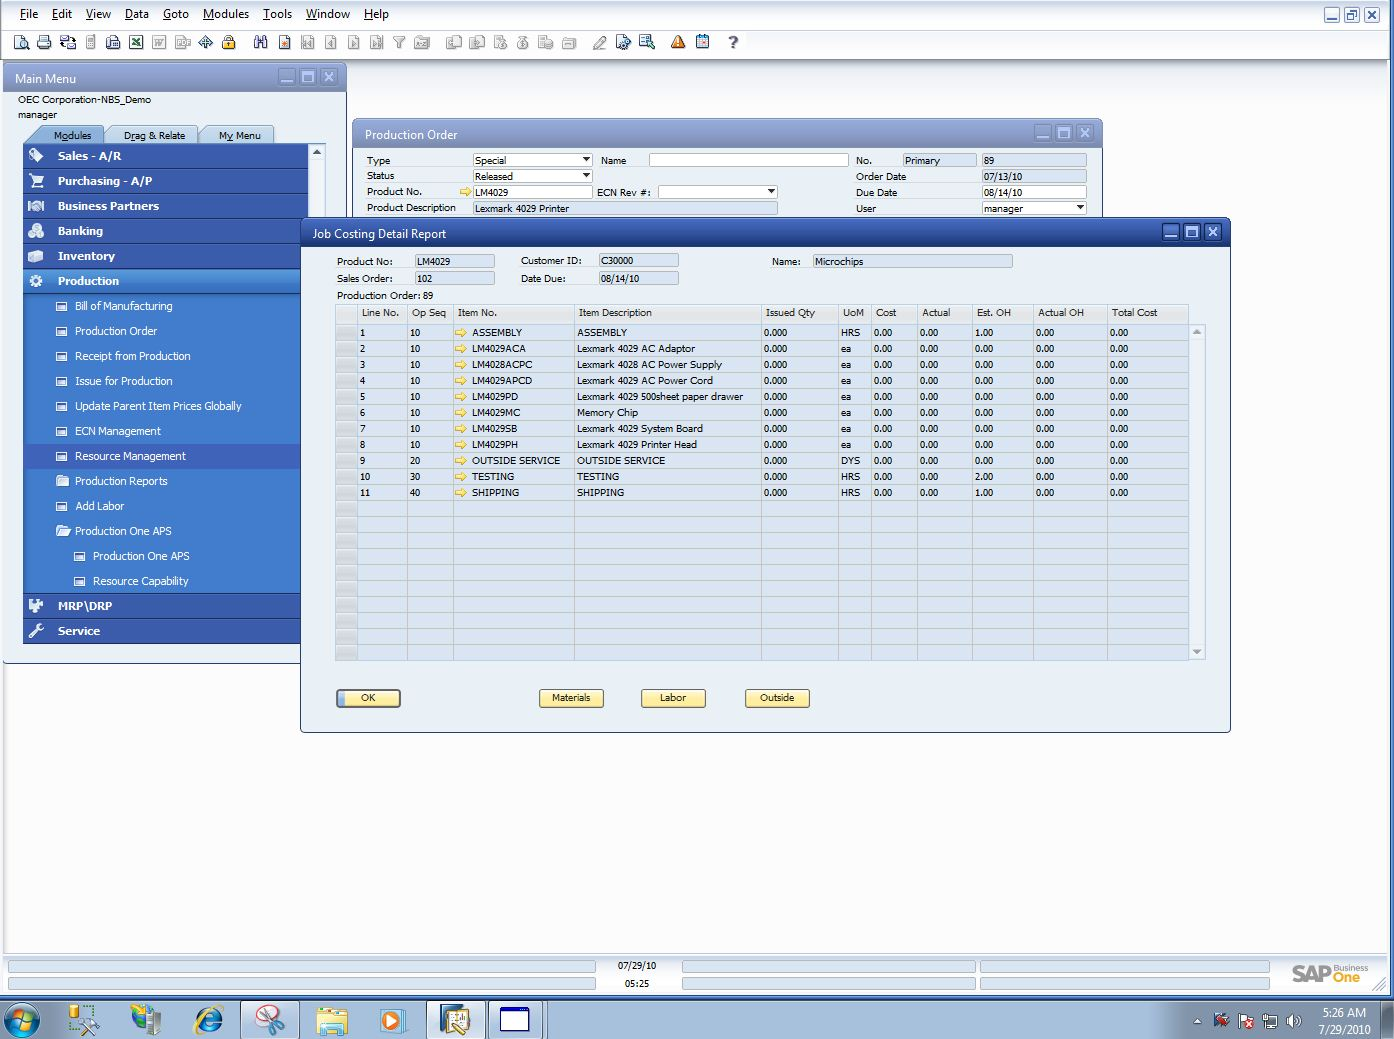 sap business one in torrent